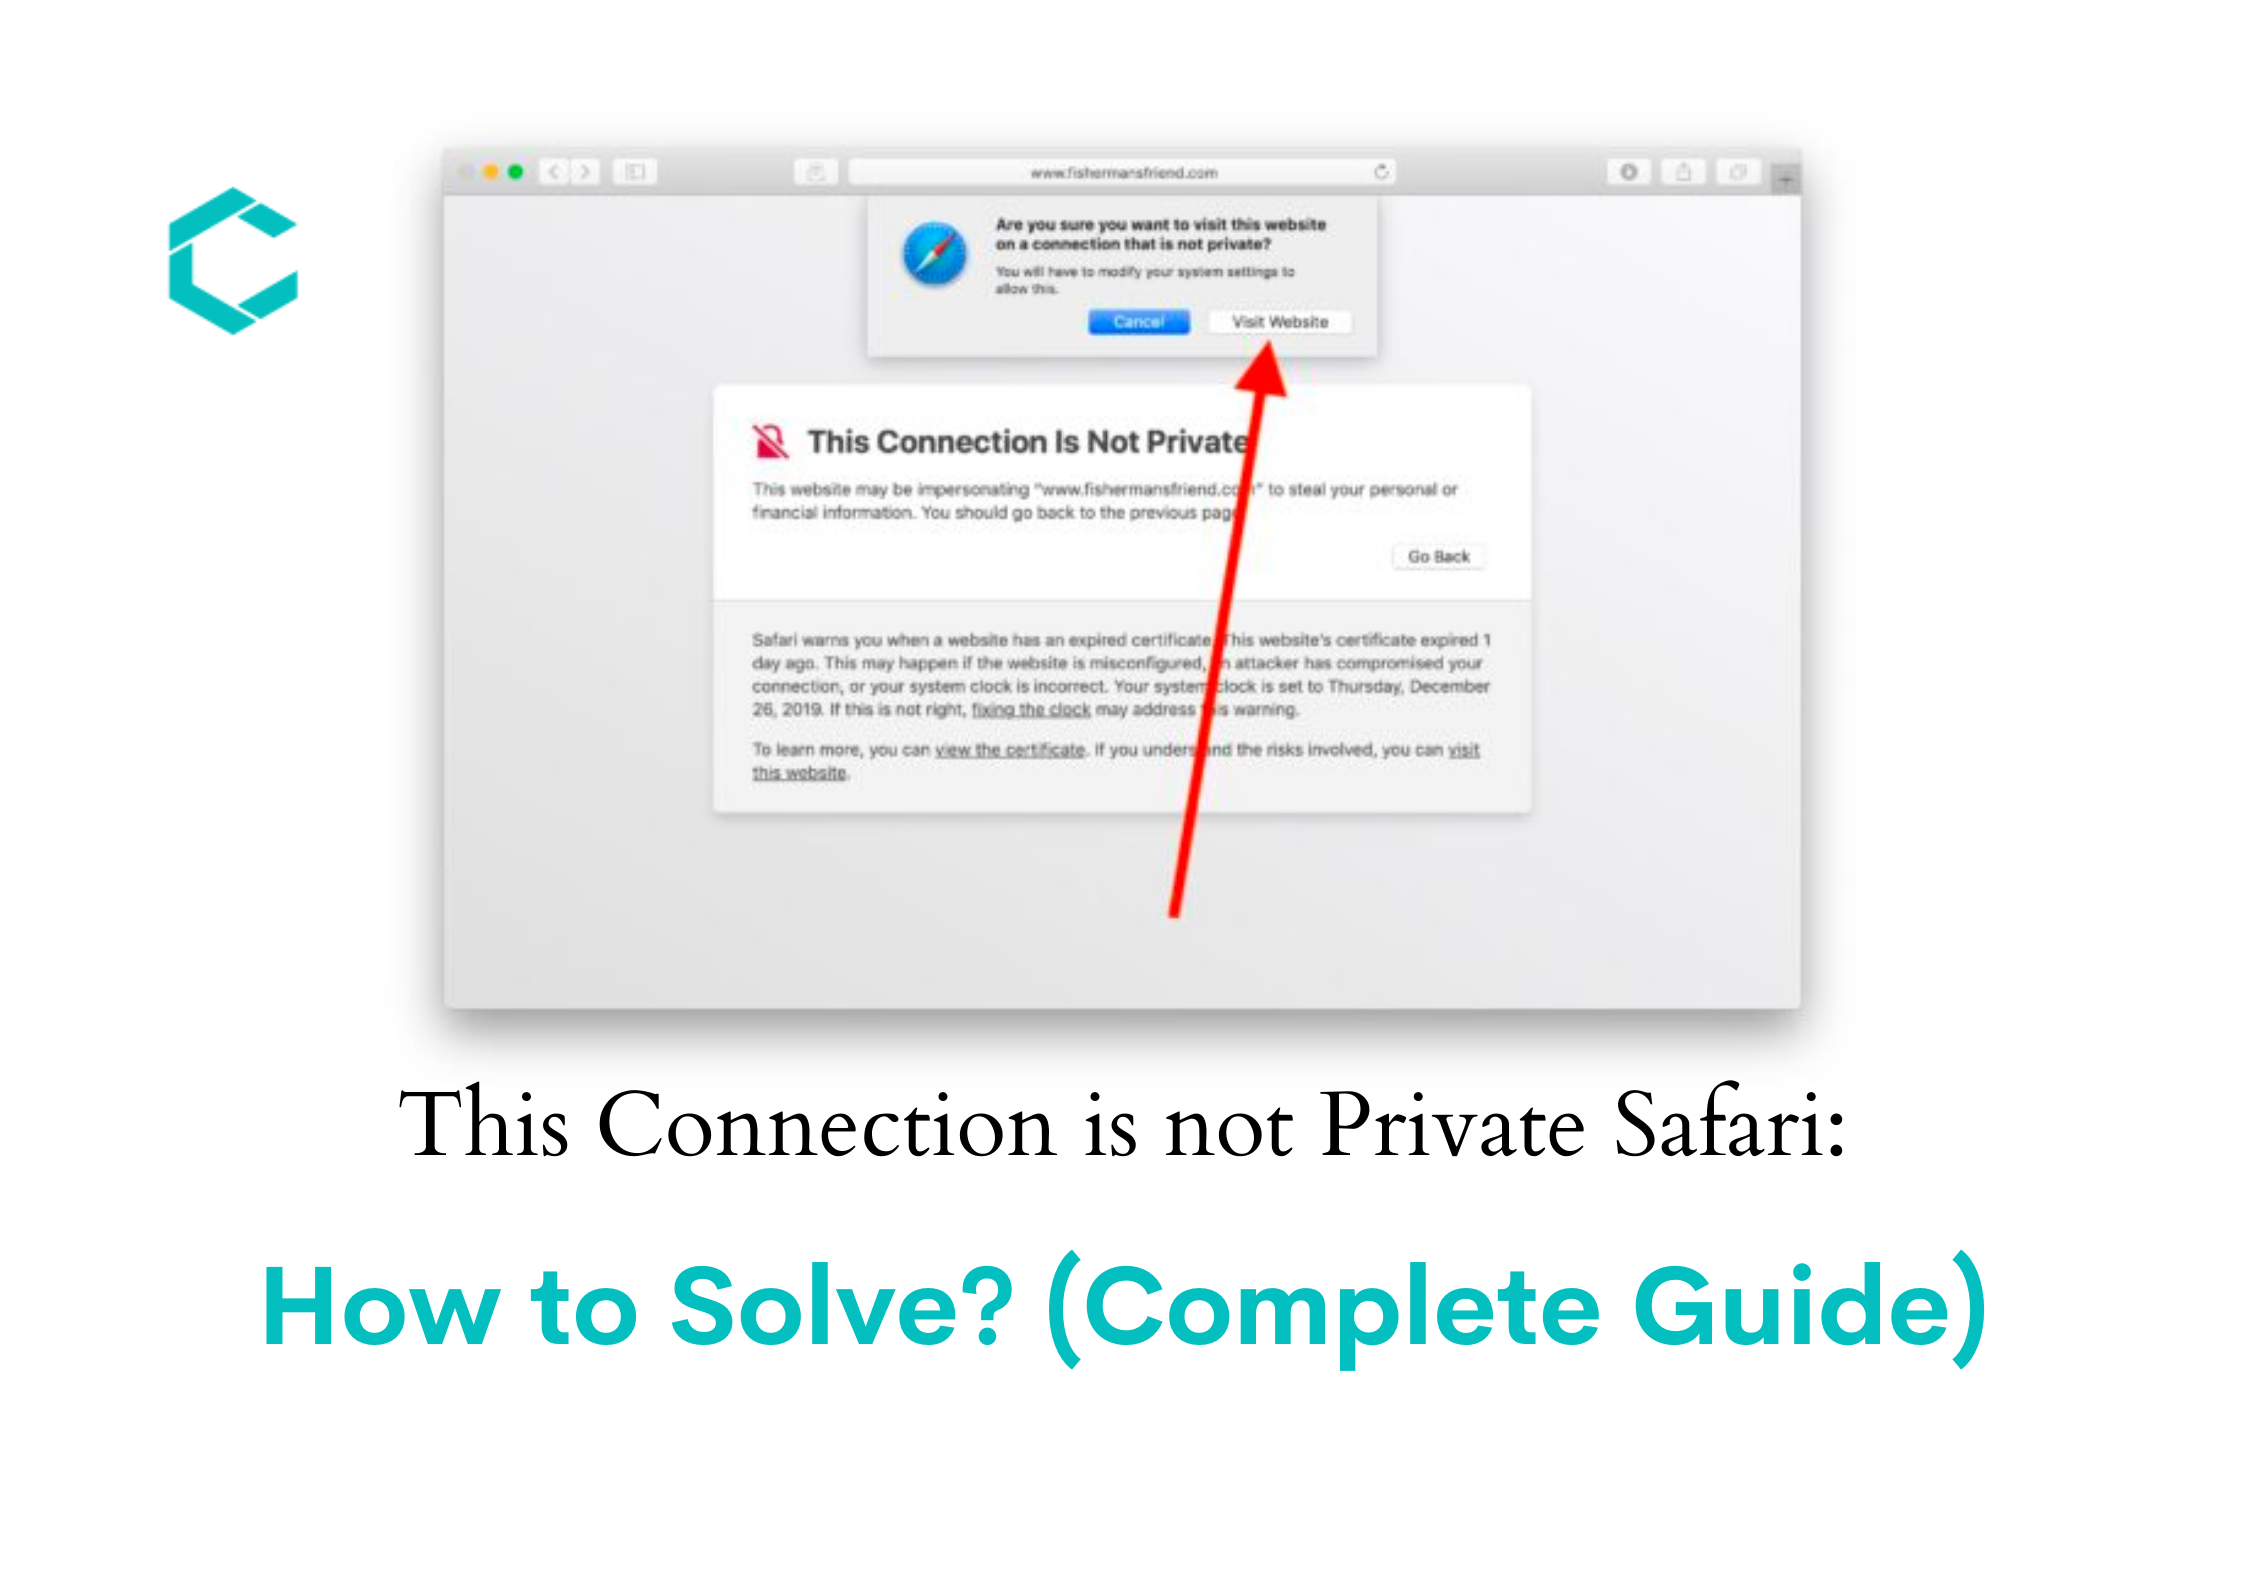 This Connection is not Private Safari